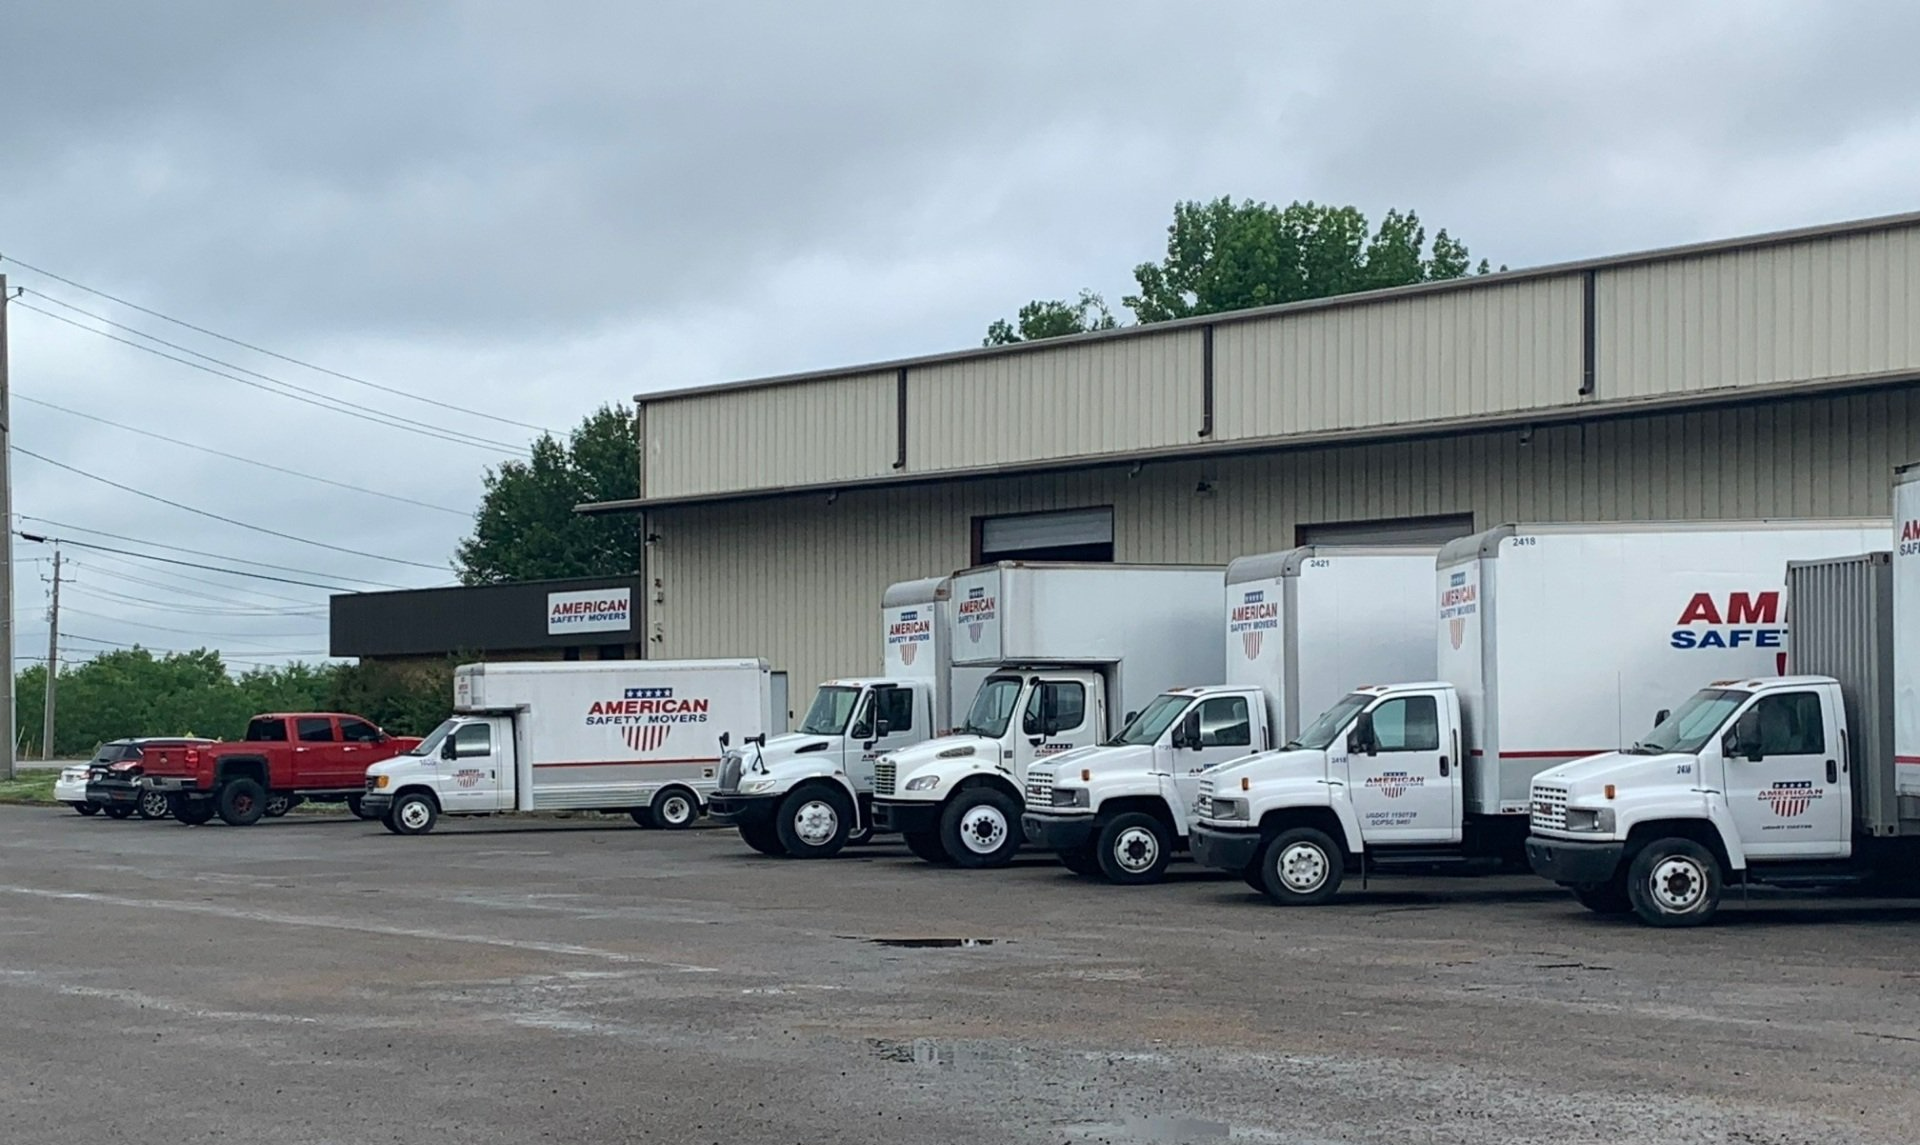 Loading Boxes in Truck — Huntsville, AL — American Safety Movers